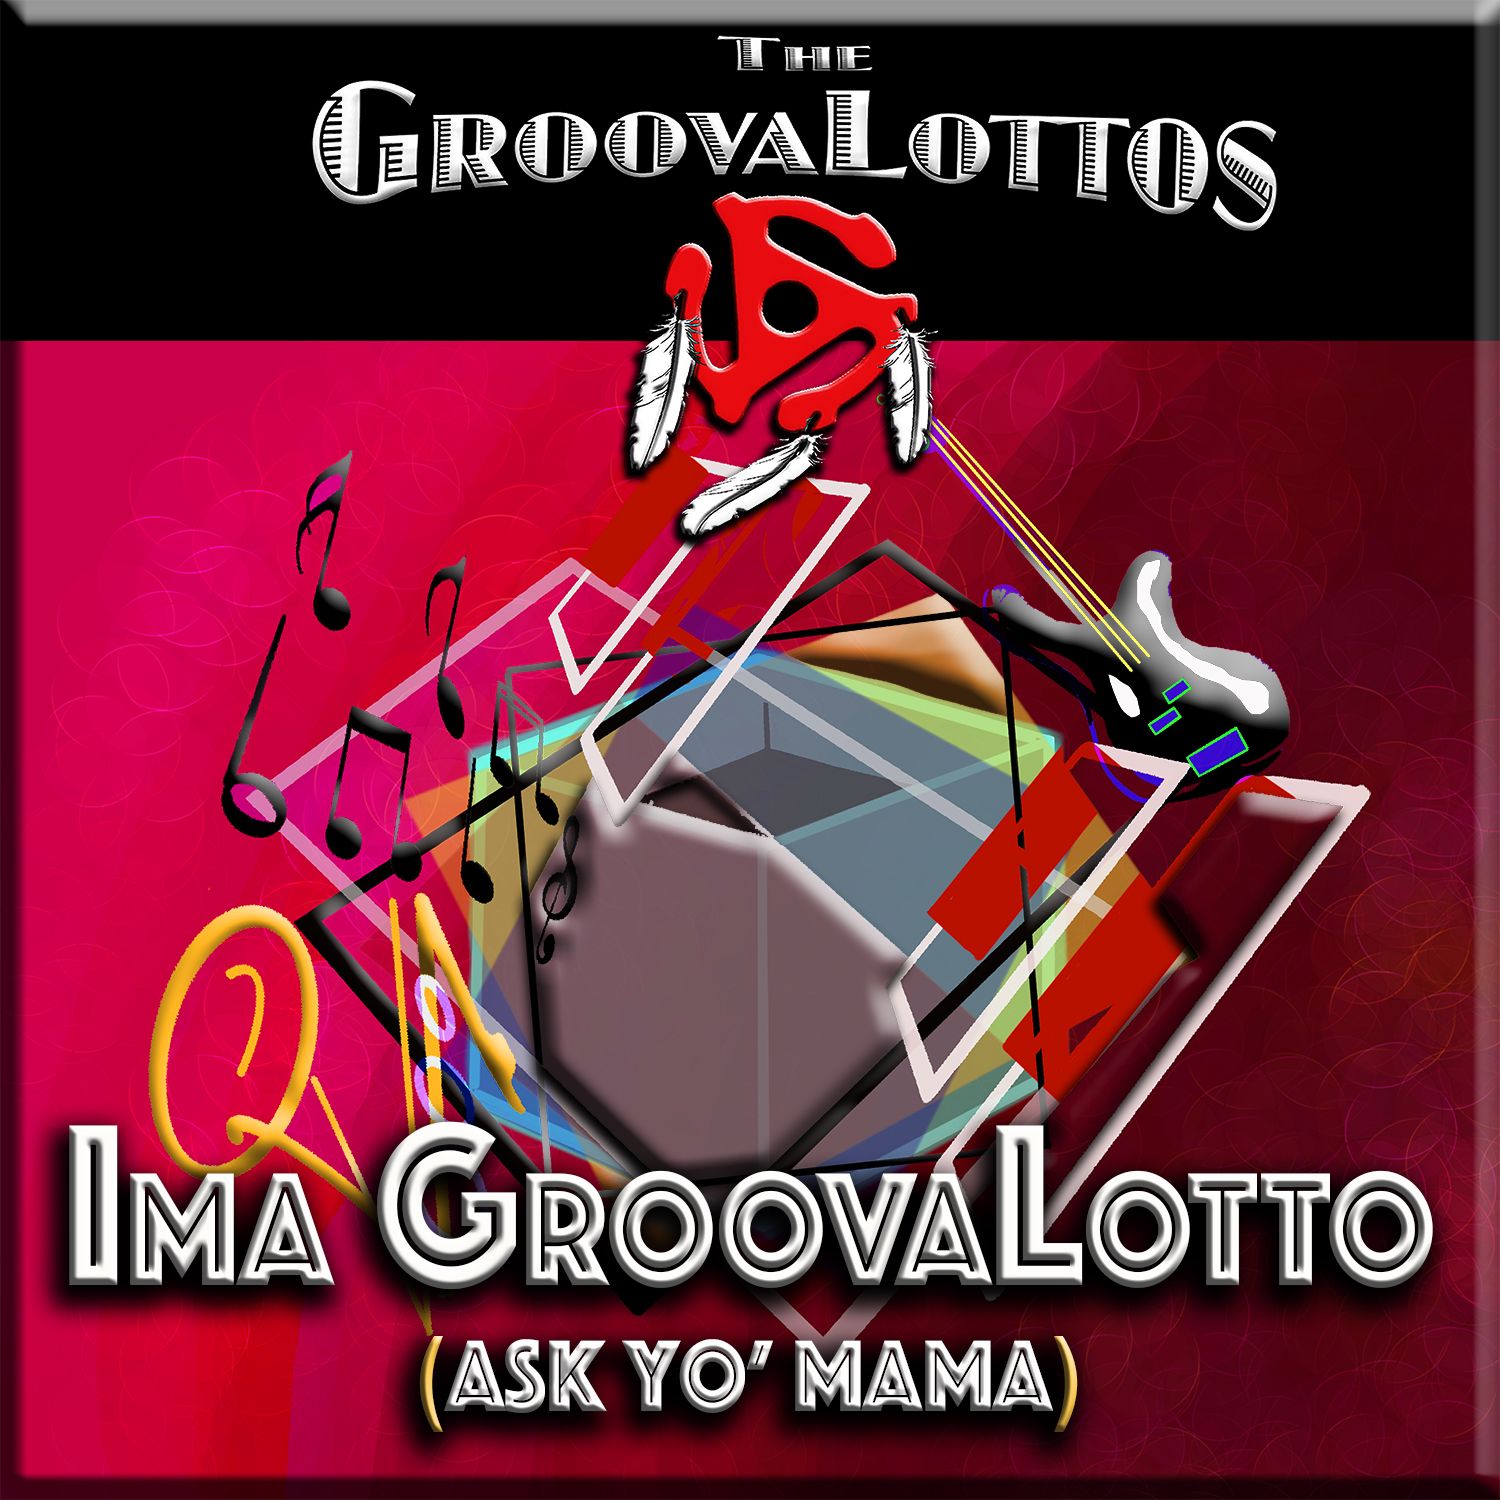 New Song and Sounds from The GroovaLottos